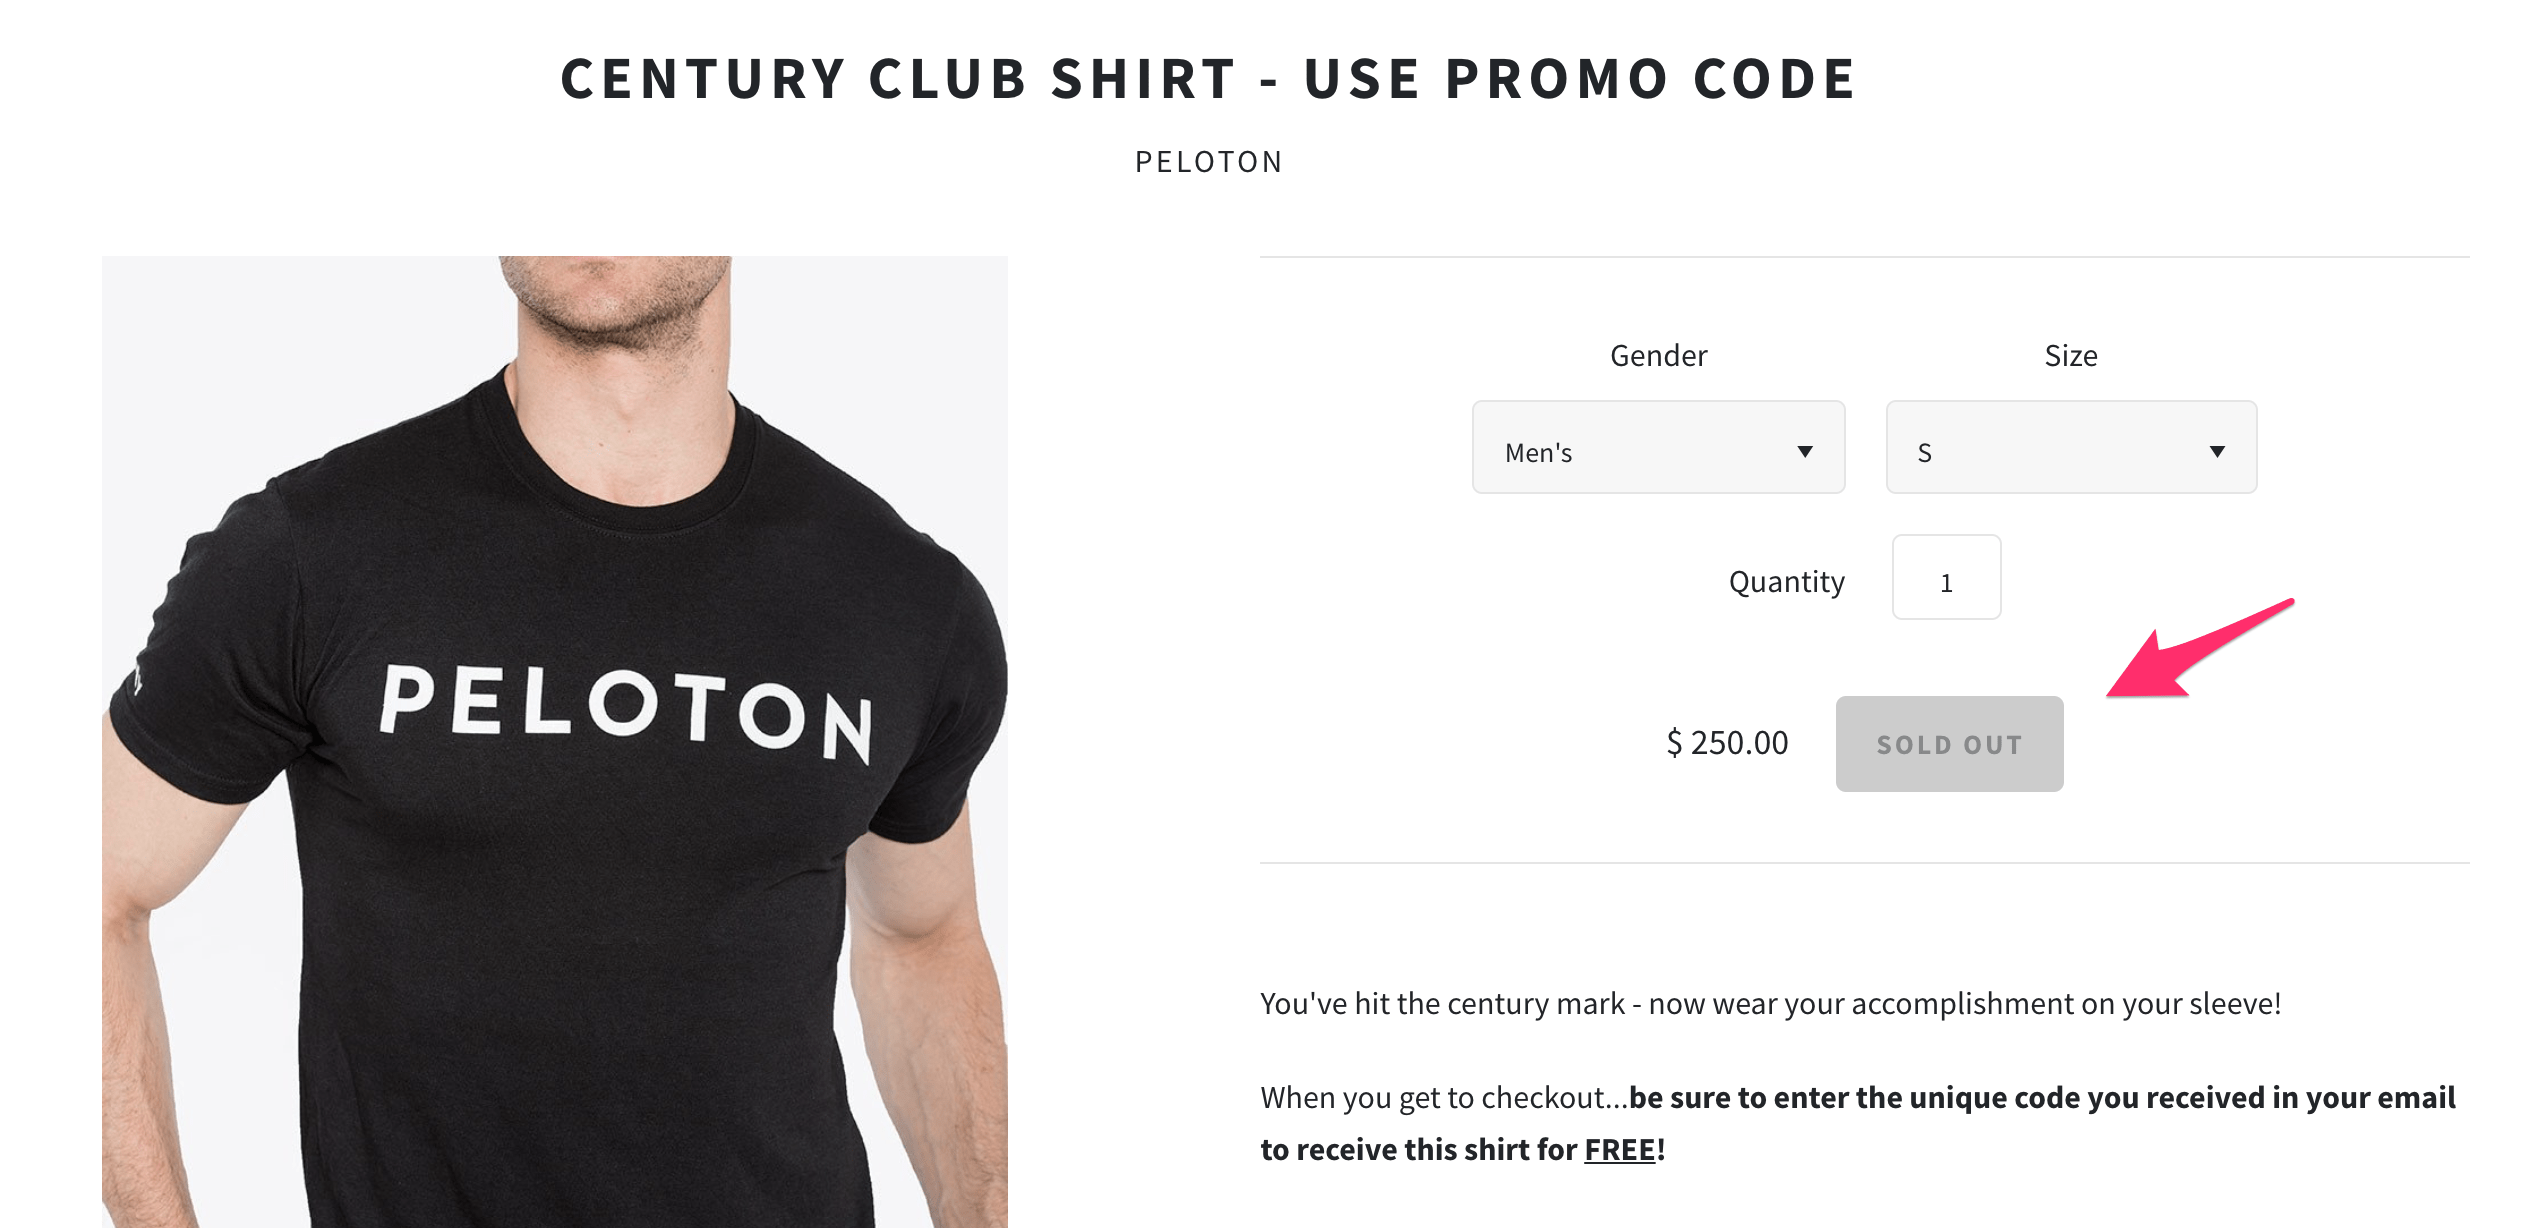 Check out page for Peloton's swag offer